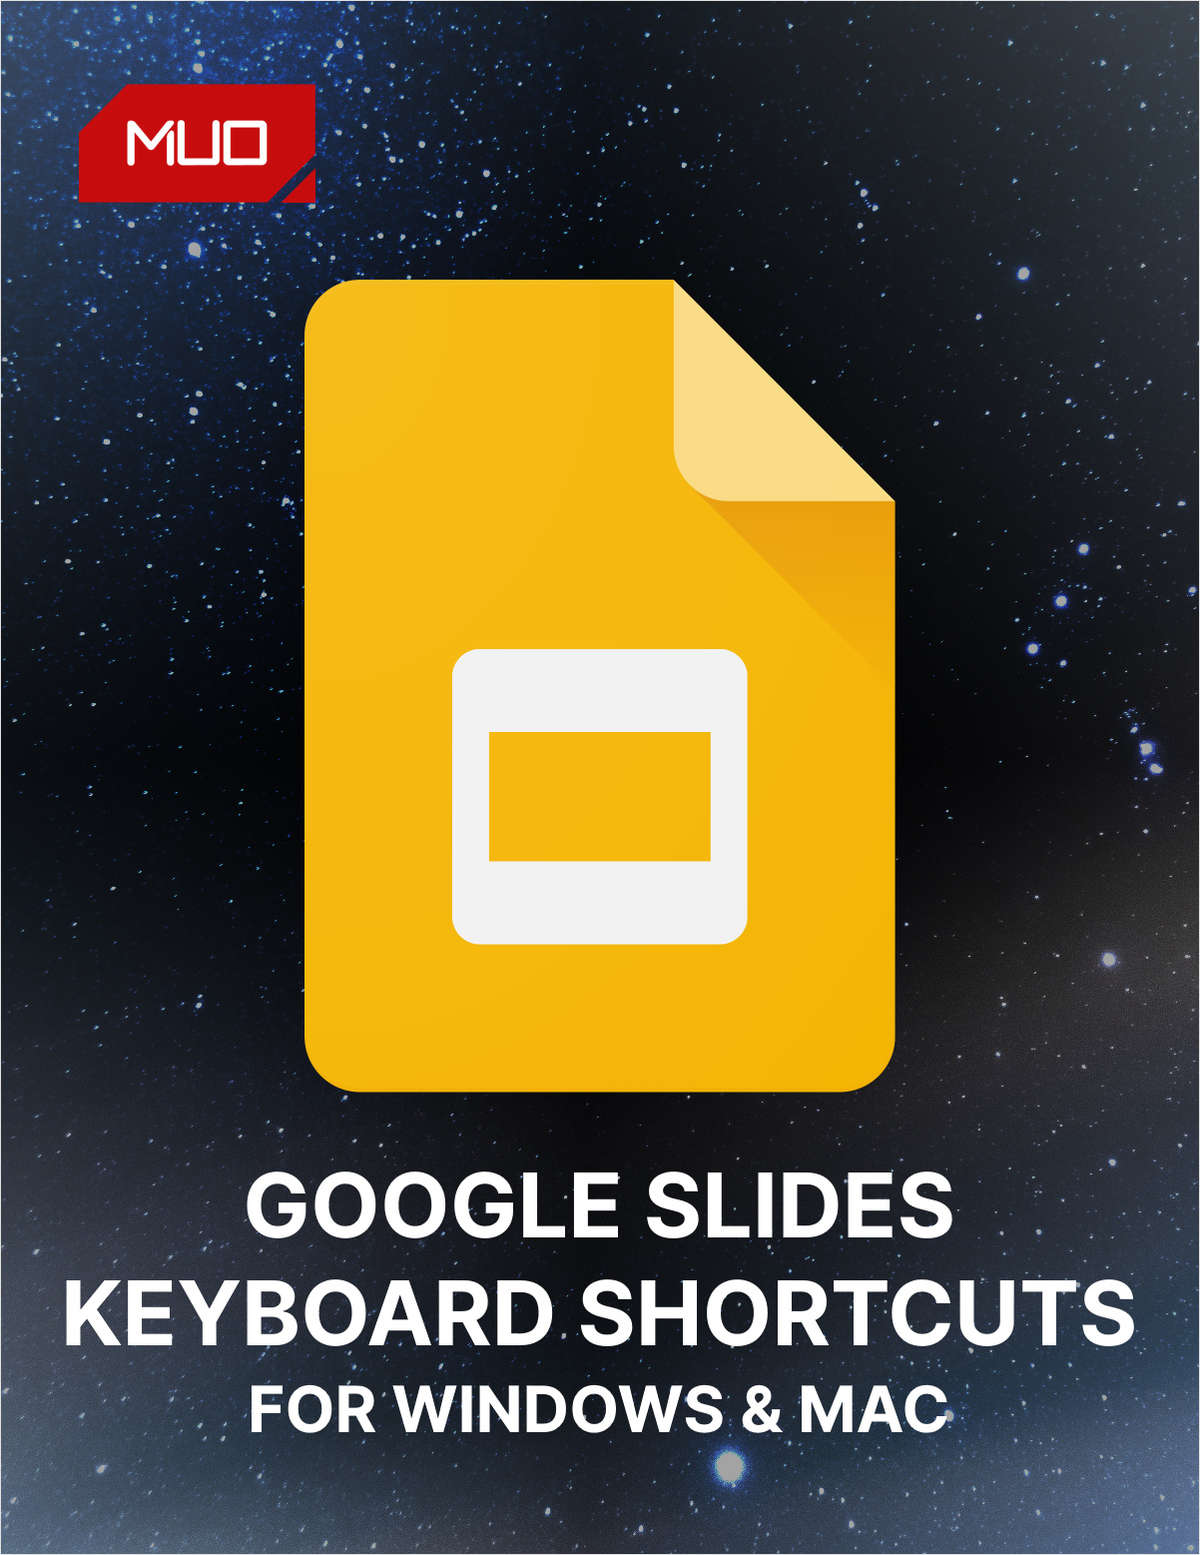 Essential Keyboard Shortcuts for Google Slides on Windows and Mac